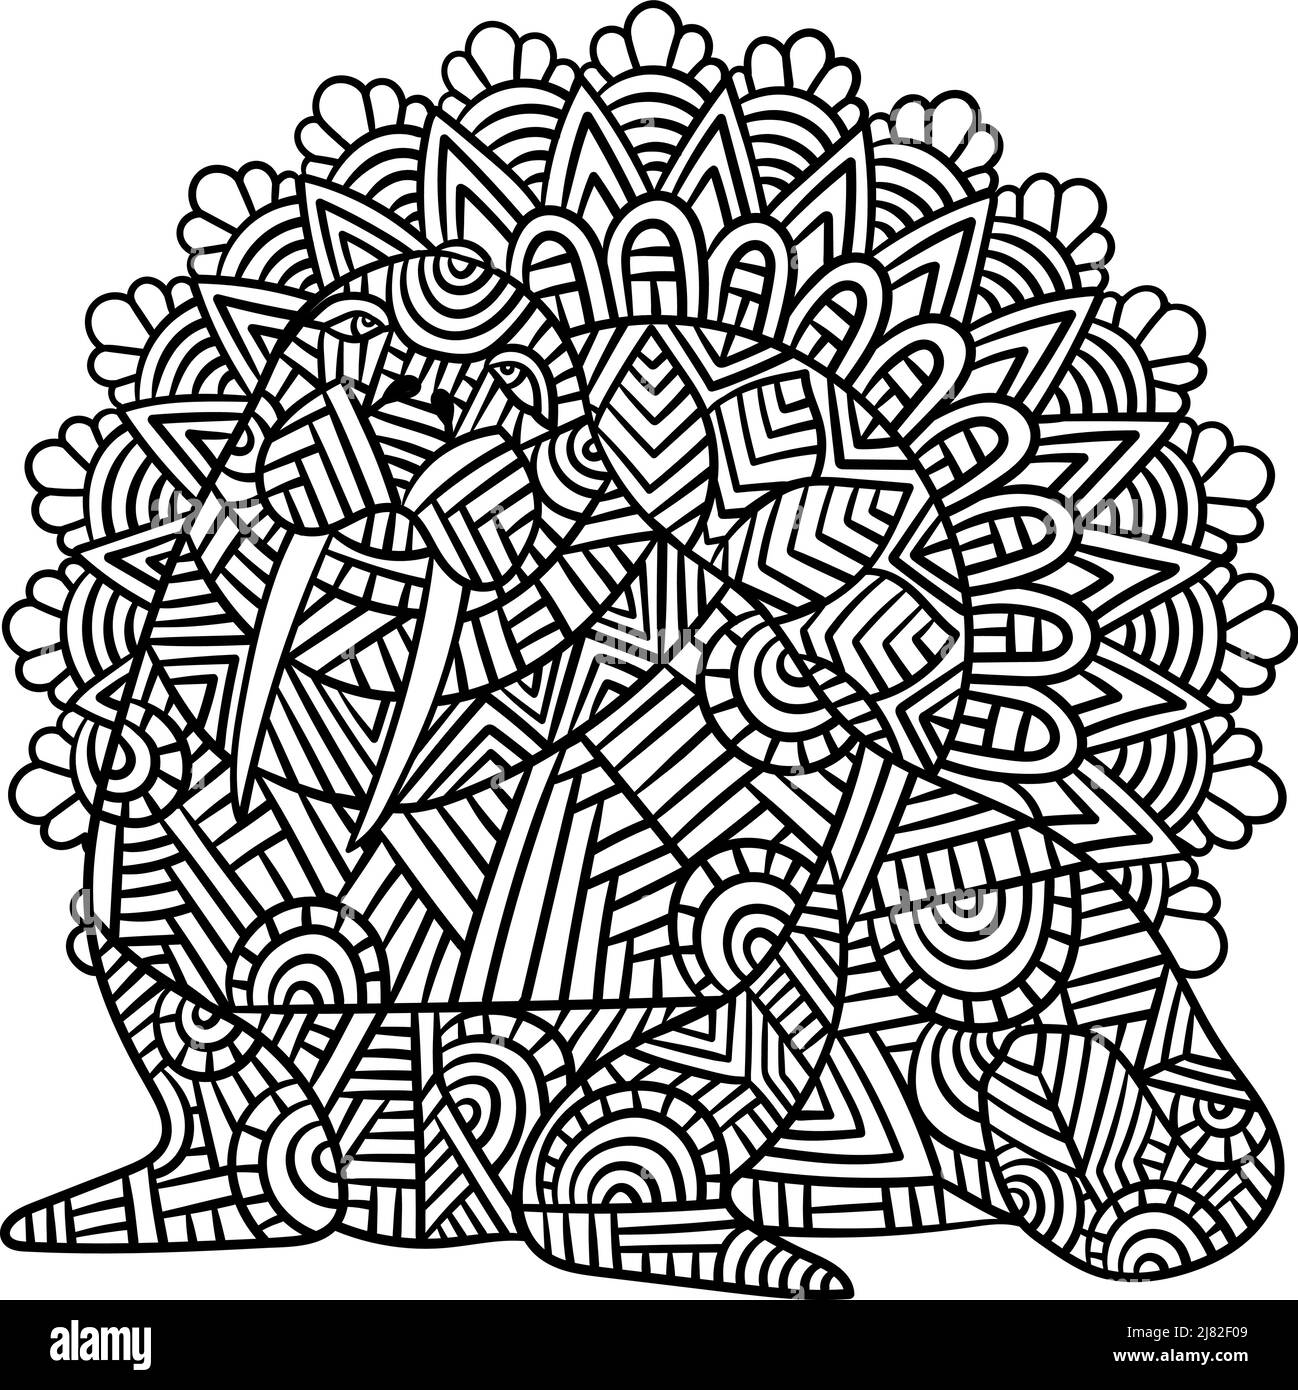 Walrus Mandala Coloring Pages for Adults Stock Vector